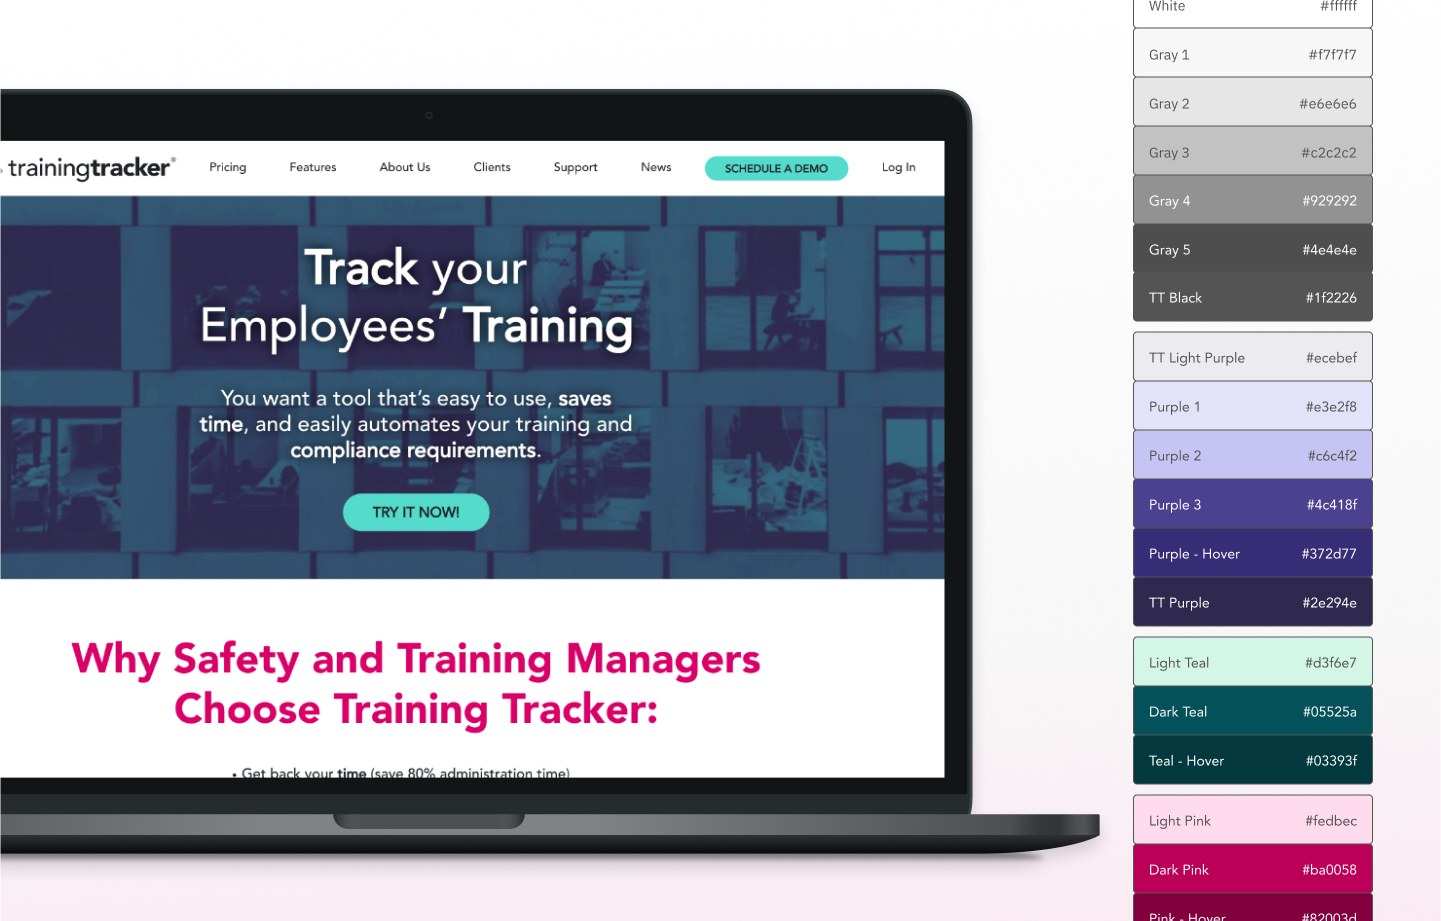 Training Tracker landing page on a laptop, with an accessible color palette to the right